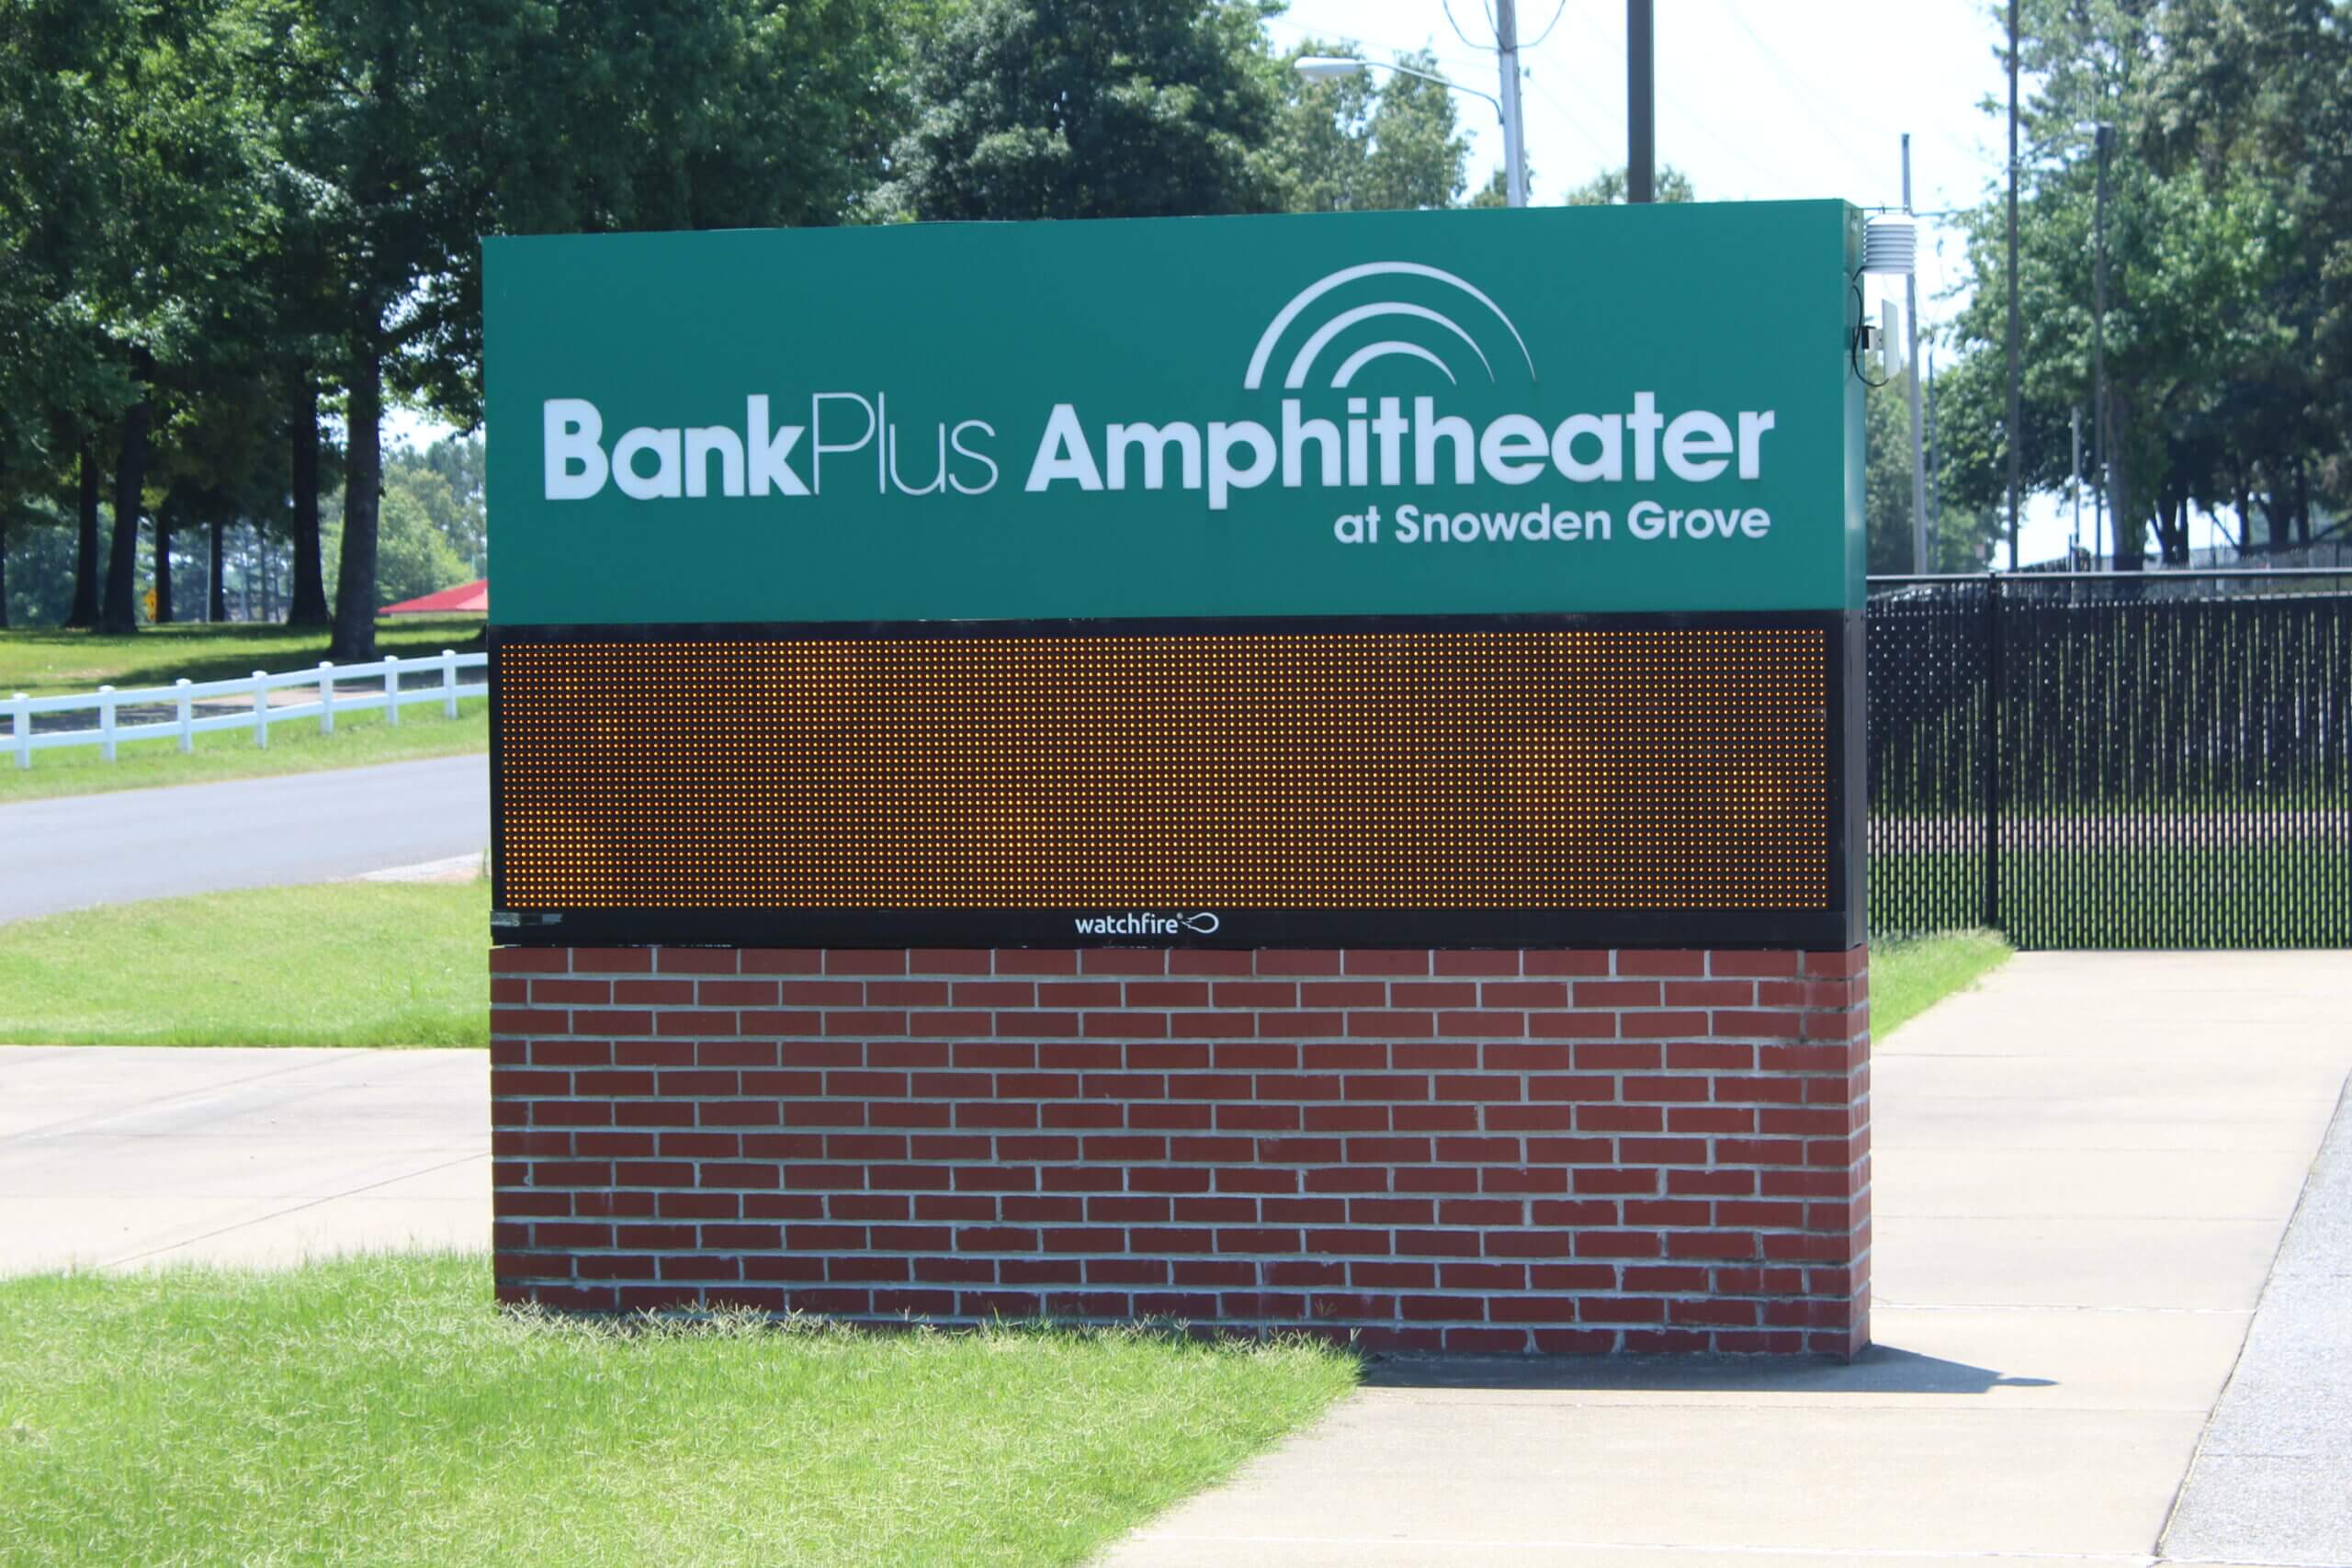 Local management named for BankPlus Amphitheater